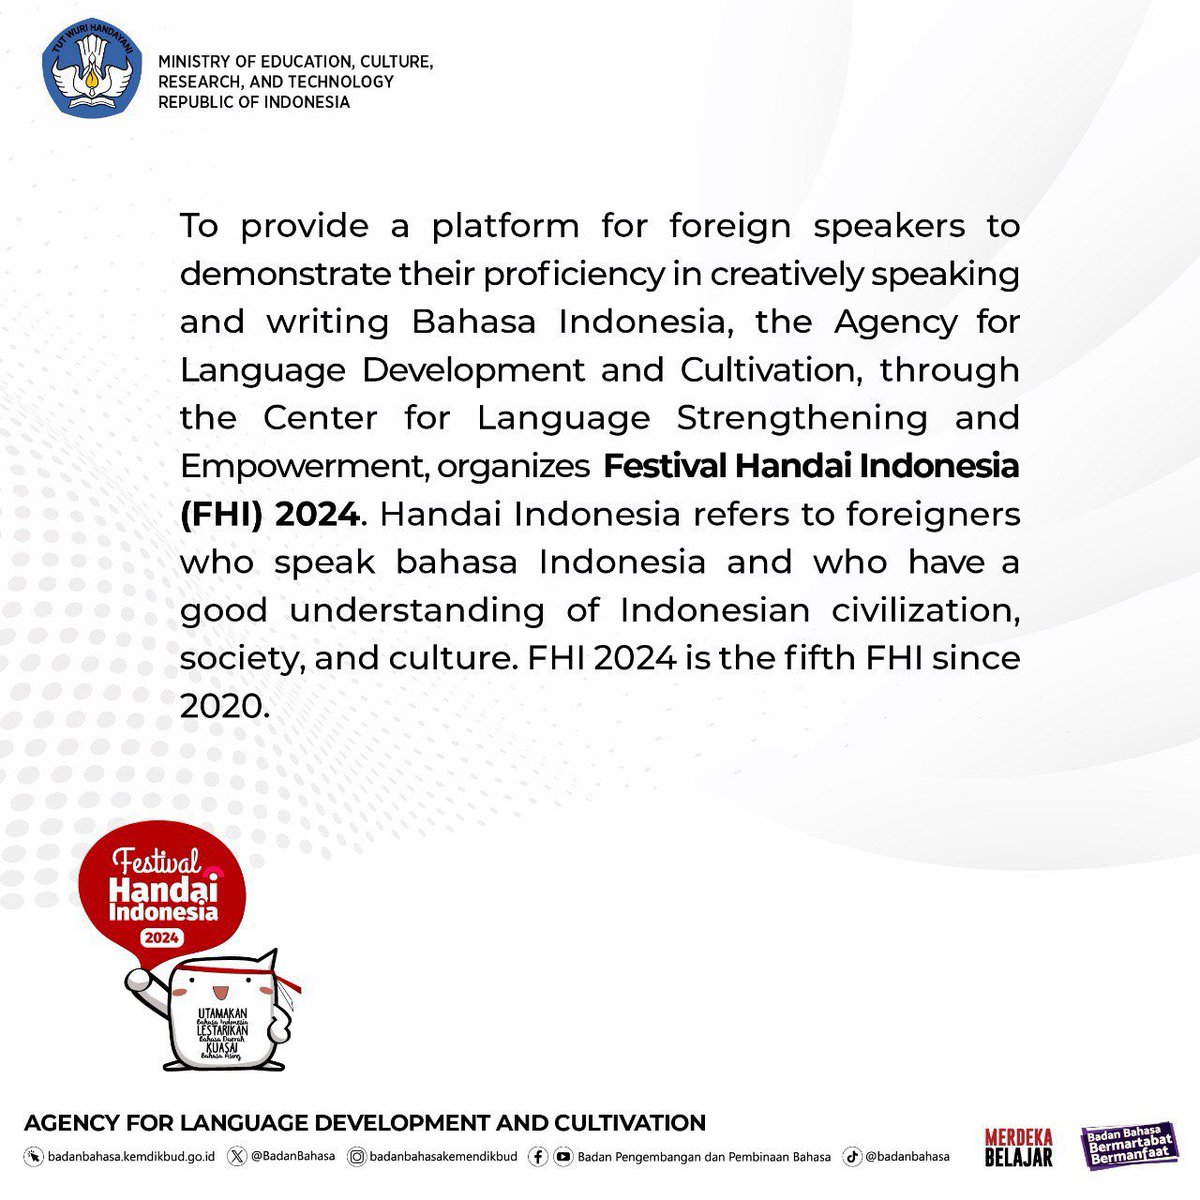 “Calling all language enthusiasts! Get ready for Festival Handai Indonesia 2024, where foreign speakers showcase their mastery of Bahasa Indonesia in creative ways.

#FHI2024 
#inidiplomasi
#kbriastana
#kbriastanatheservingembassy